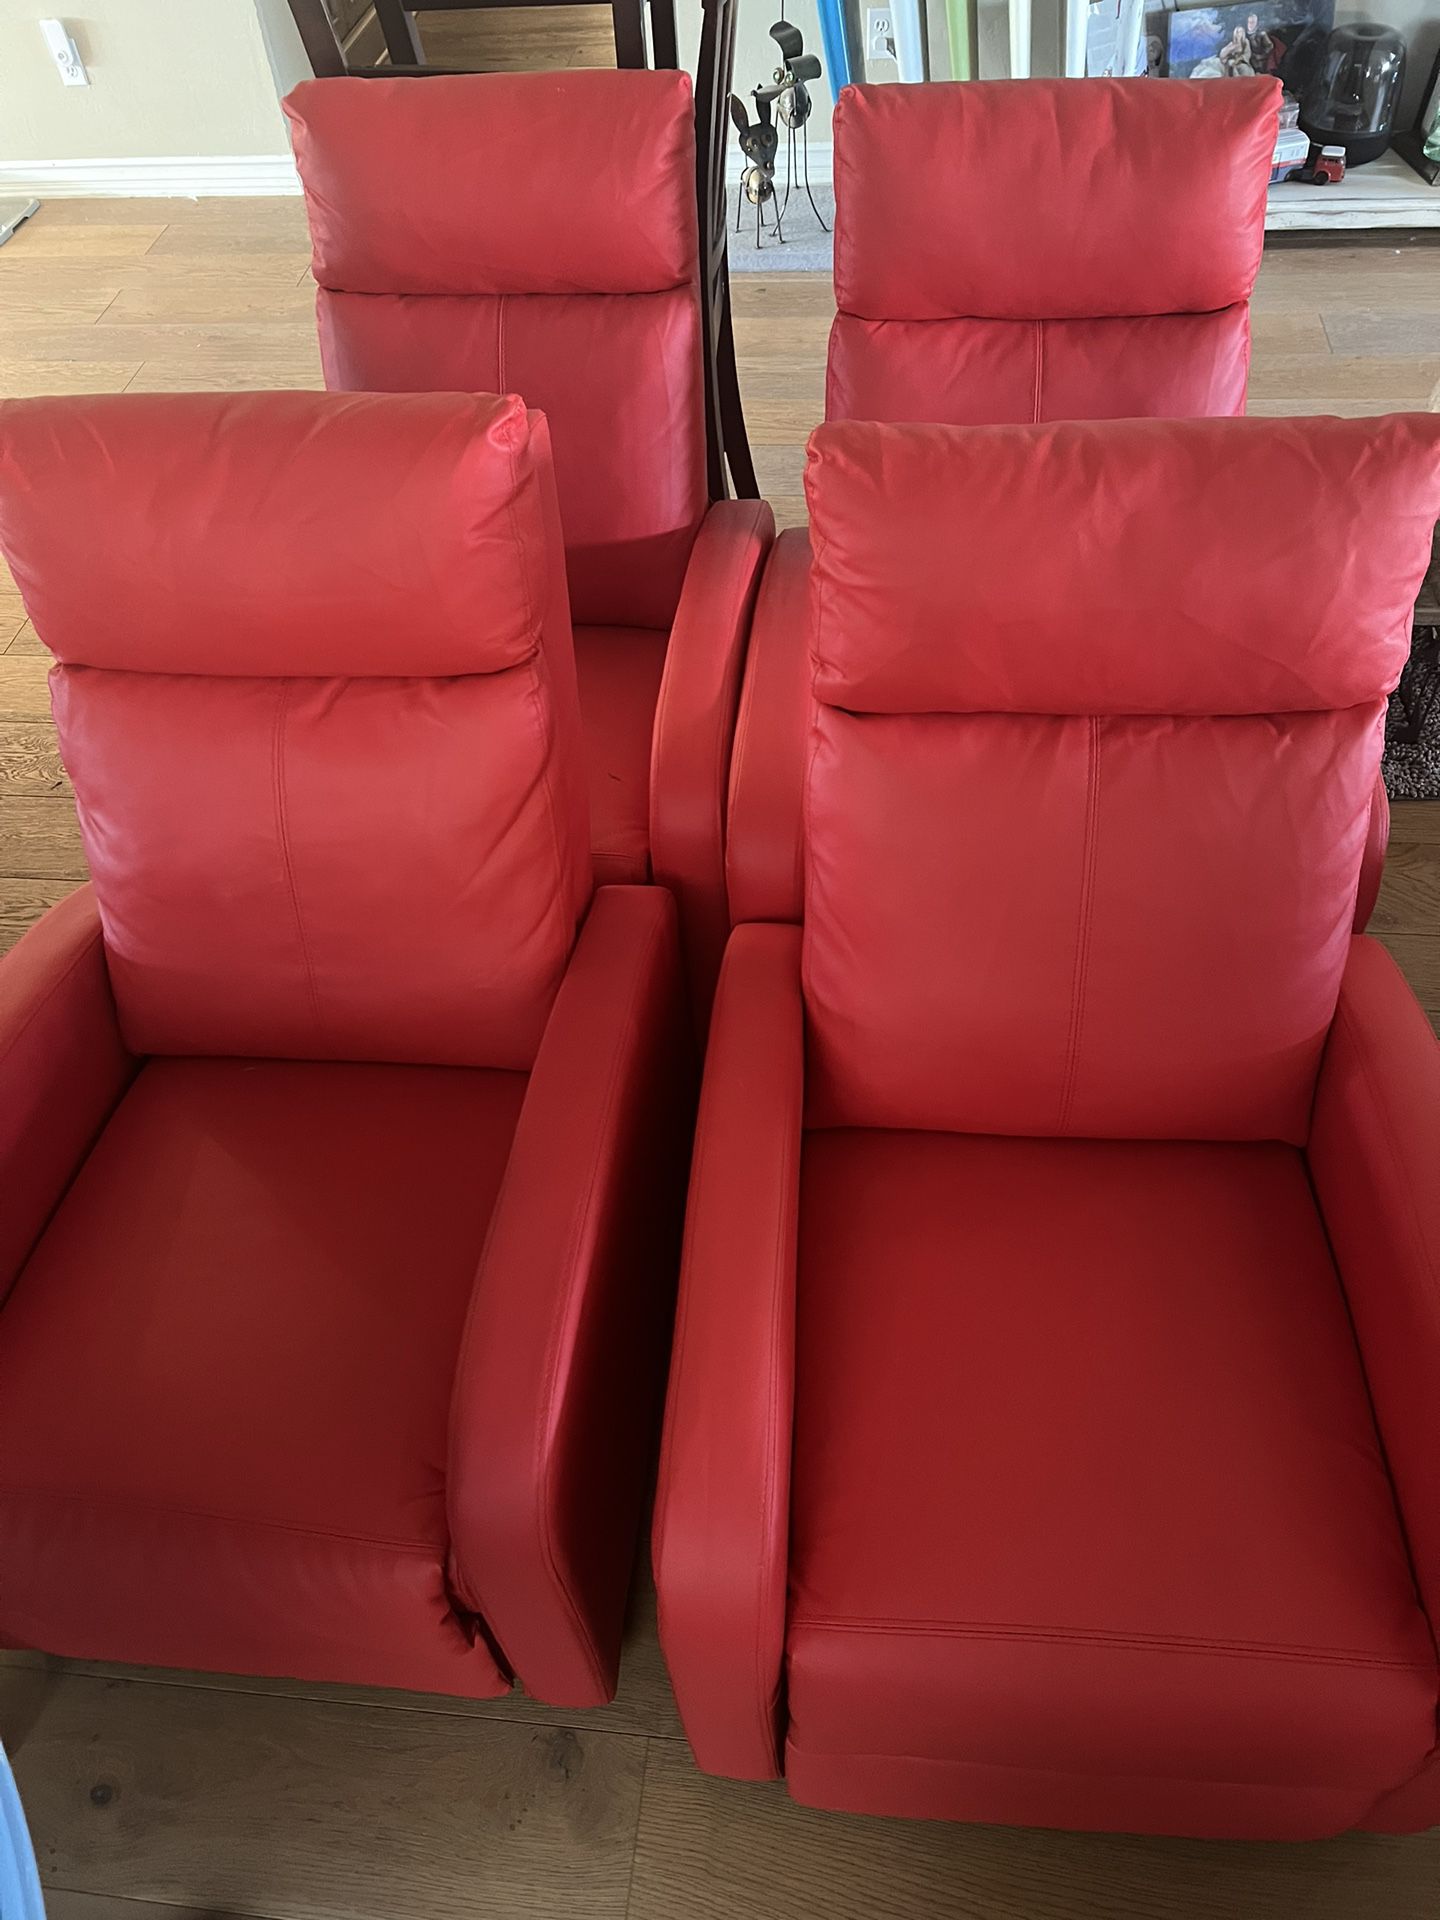 Movie Theater Recliner Chairs